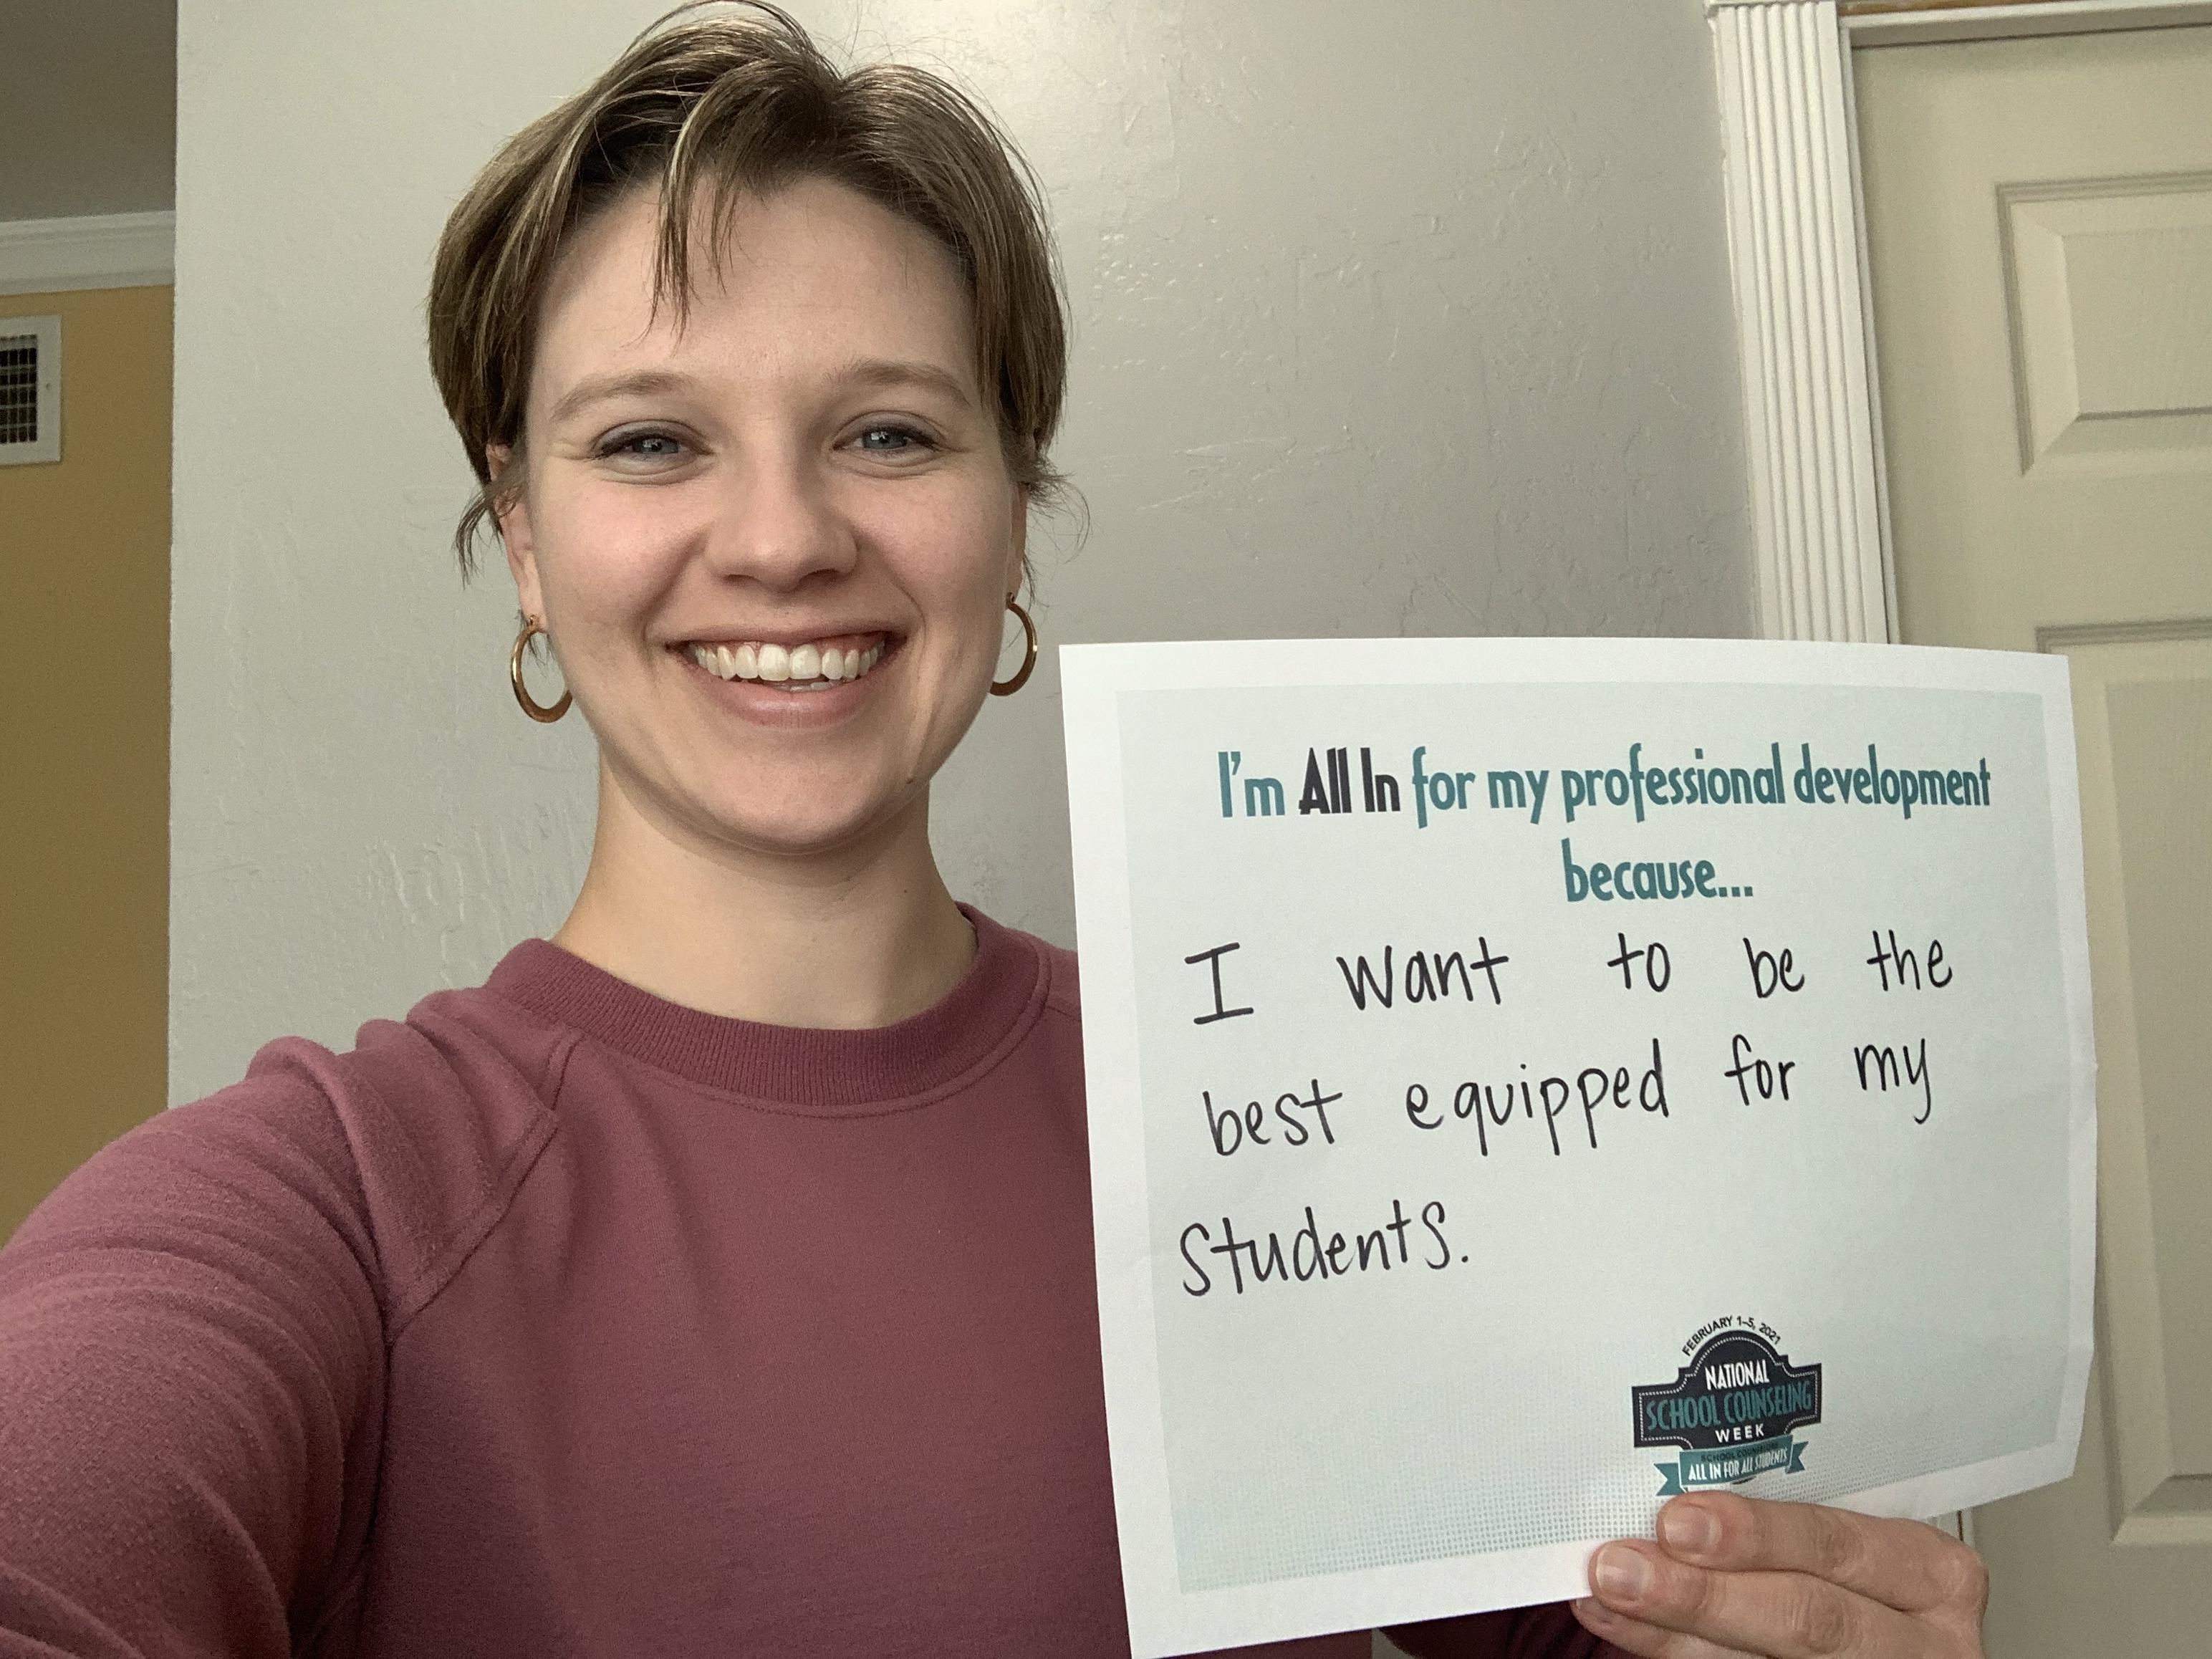 Kacie Salamanca with a sign "I'm all in for professional development because I want to be the best equipped for my students.